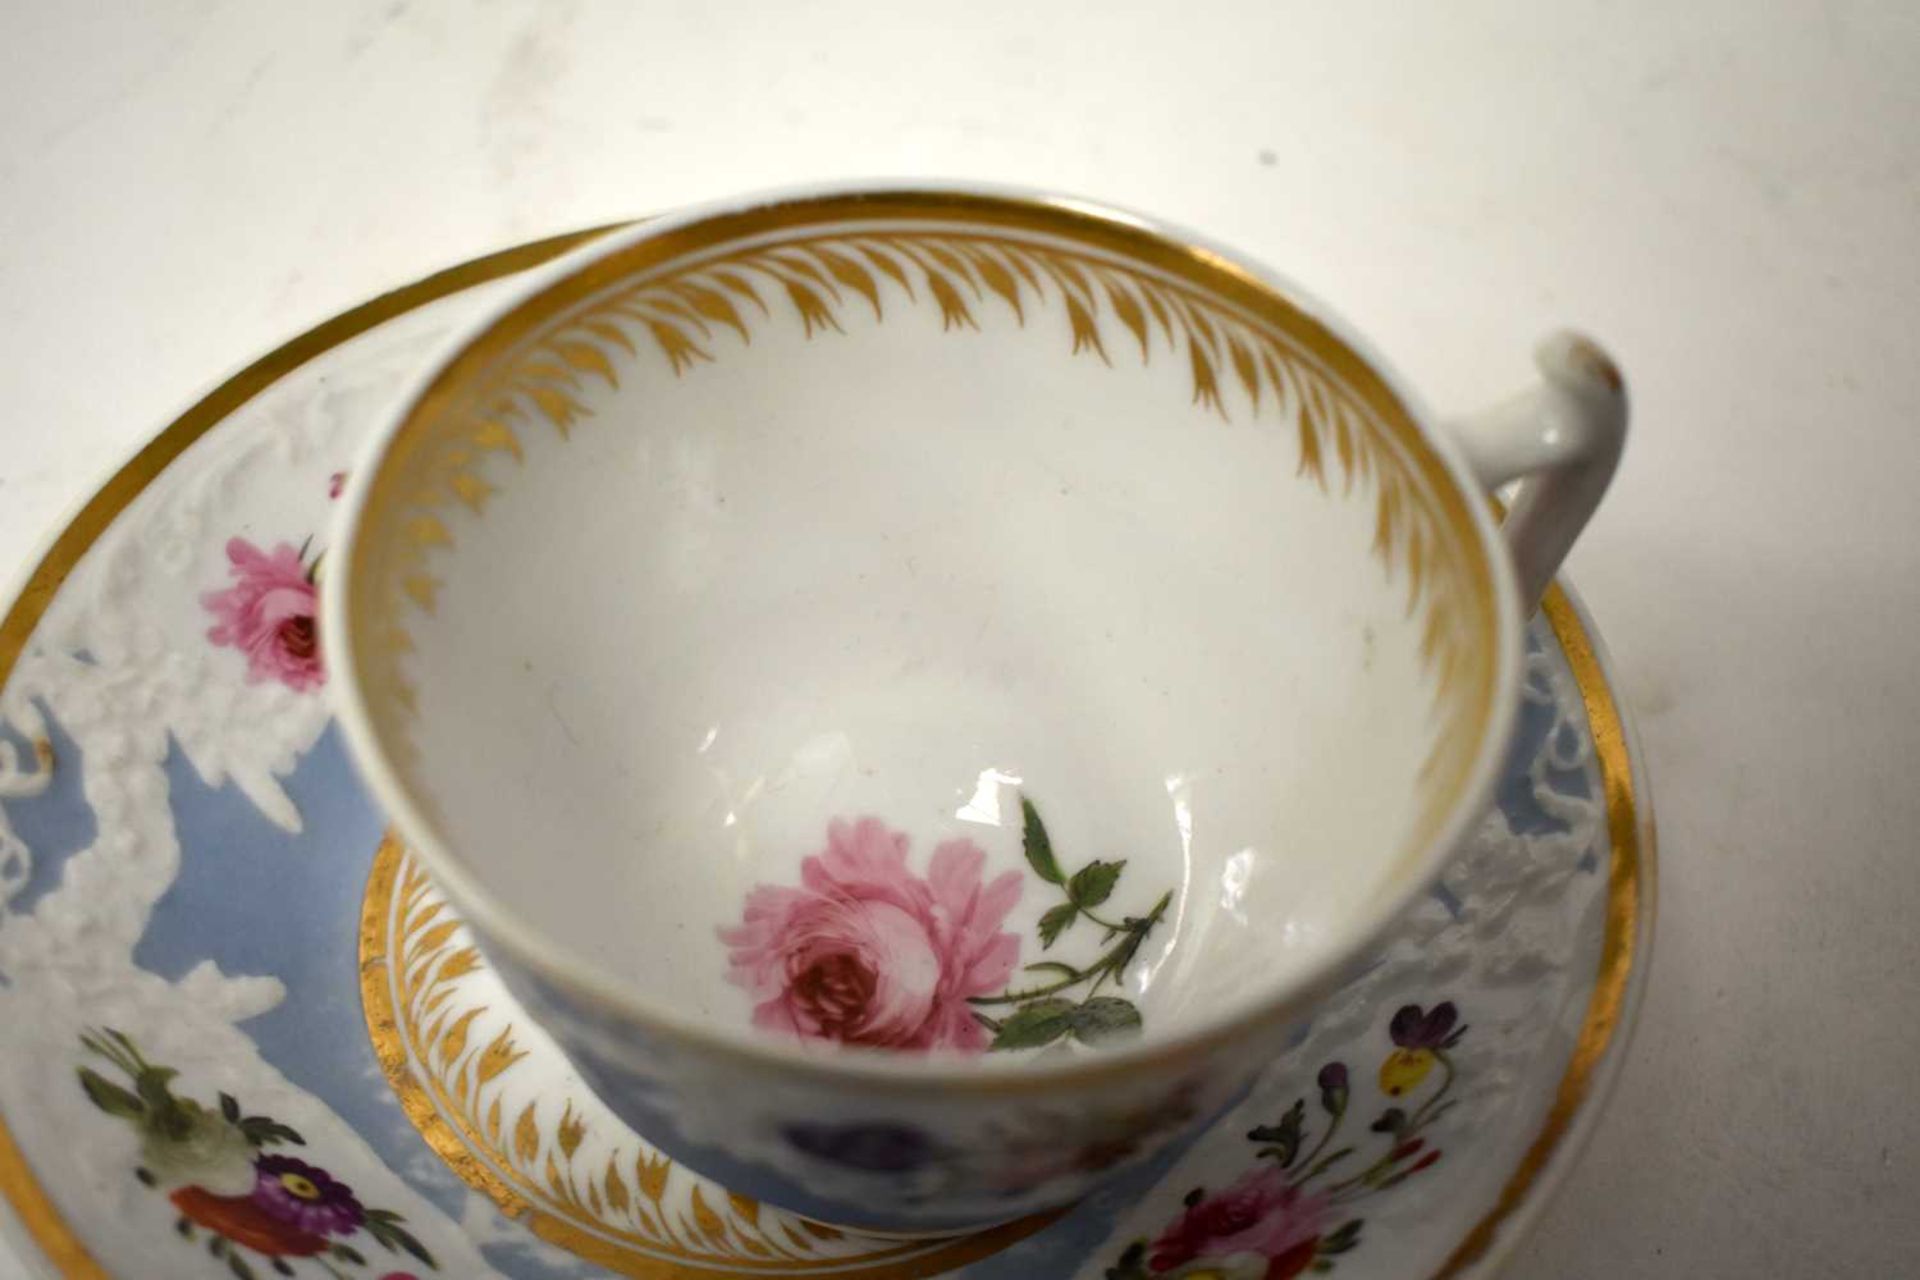 AN EARLY 19TH CENTURY CHAMBERLAINS WORCESTER PART TEASET painted with floral sprays, under a moulded - Image 25 of 36